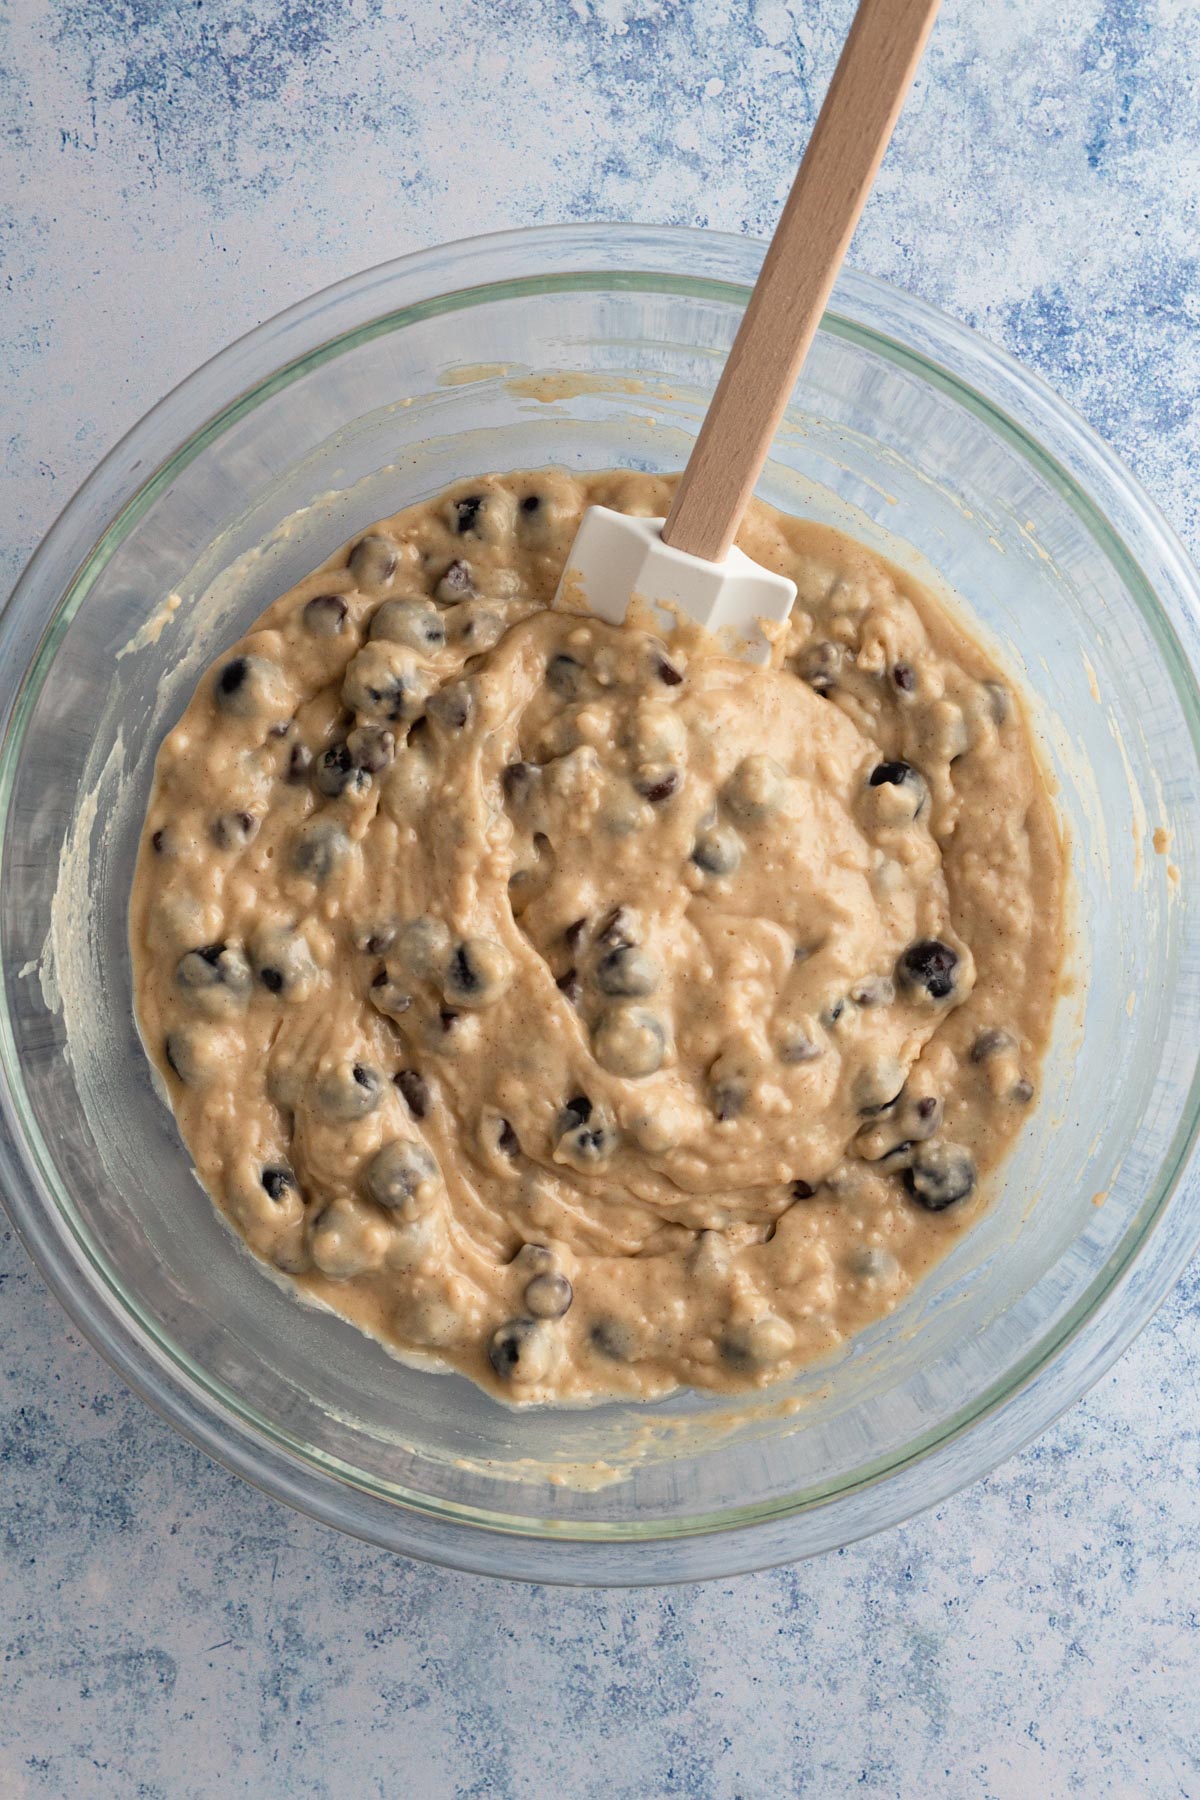 Overhead view of blueberries and chocolate chips blended into muffin batter in a glass bowl.